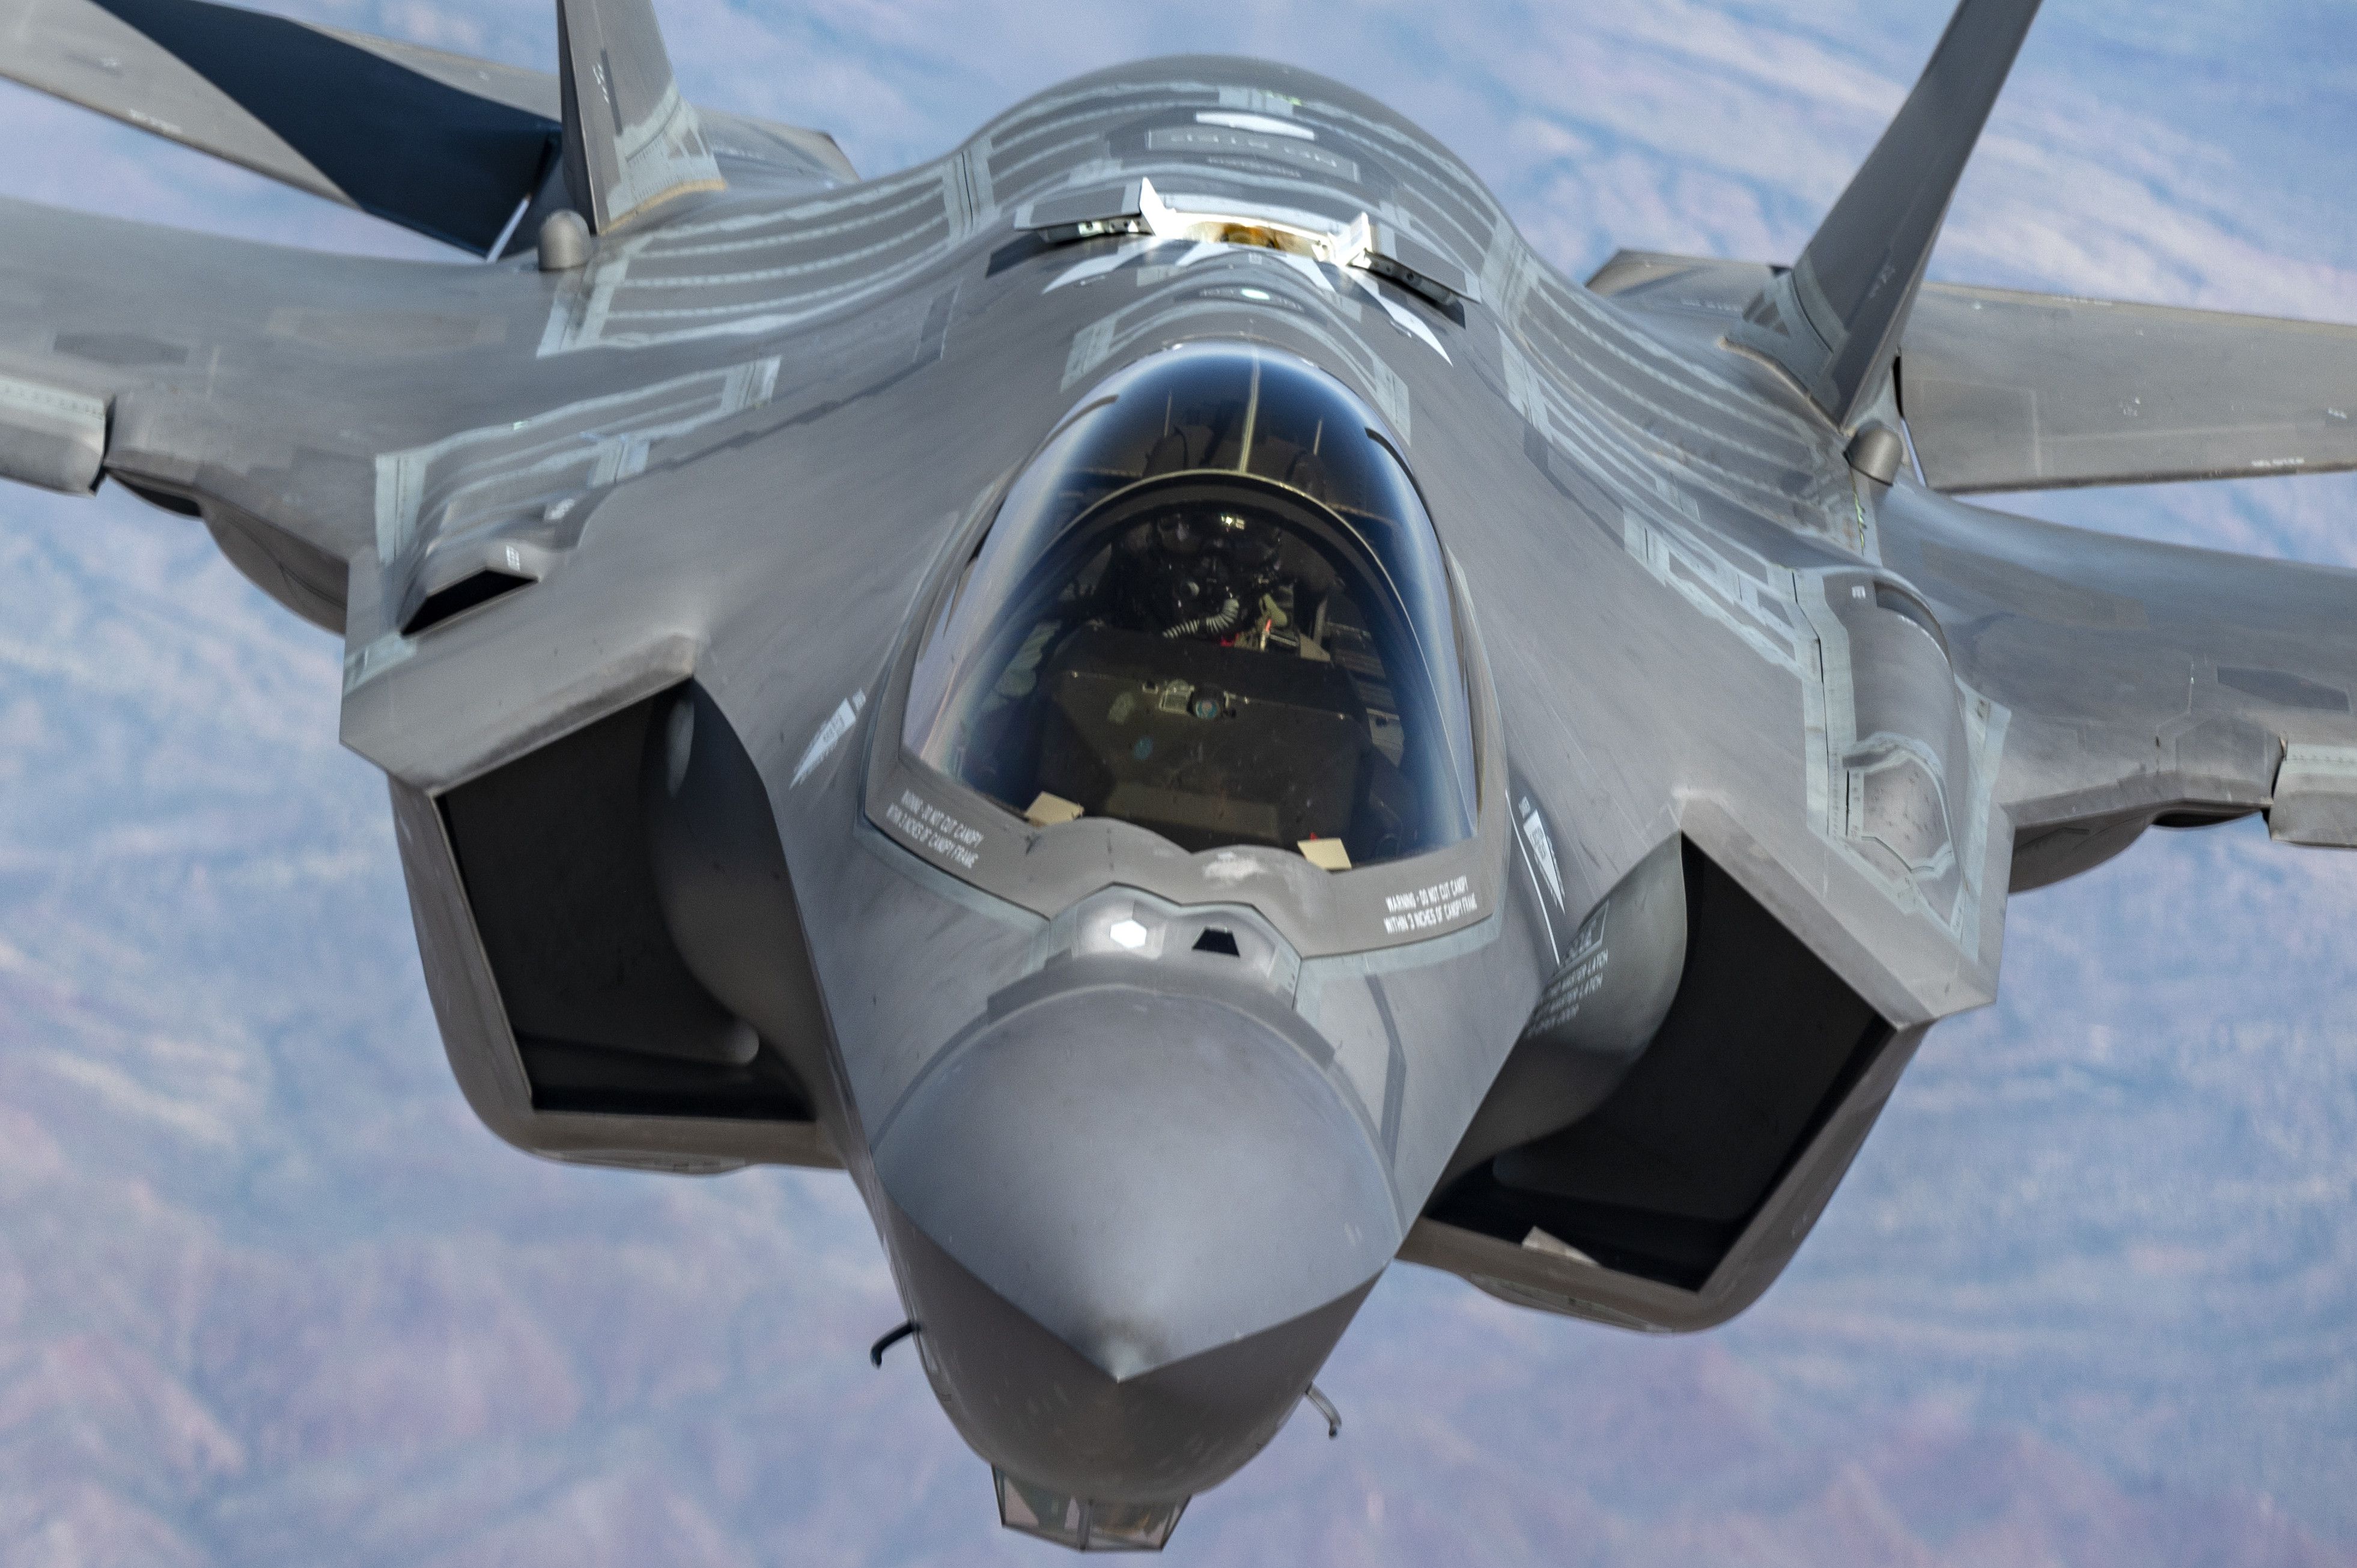 F-35: Controversial, Capable, or Both? - The Armory Life